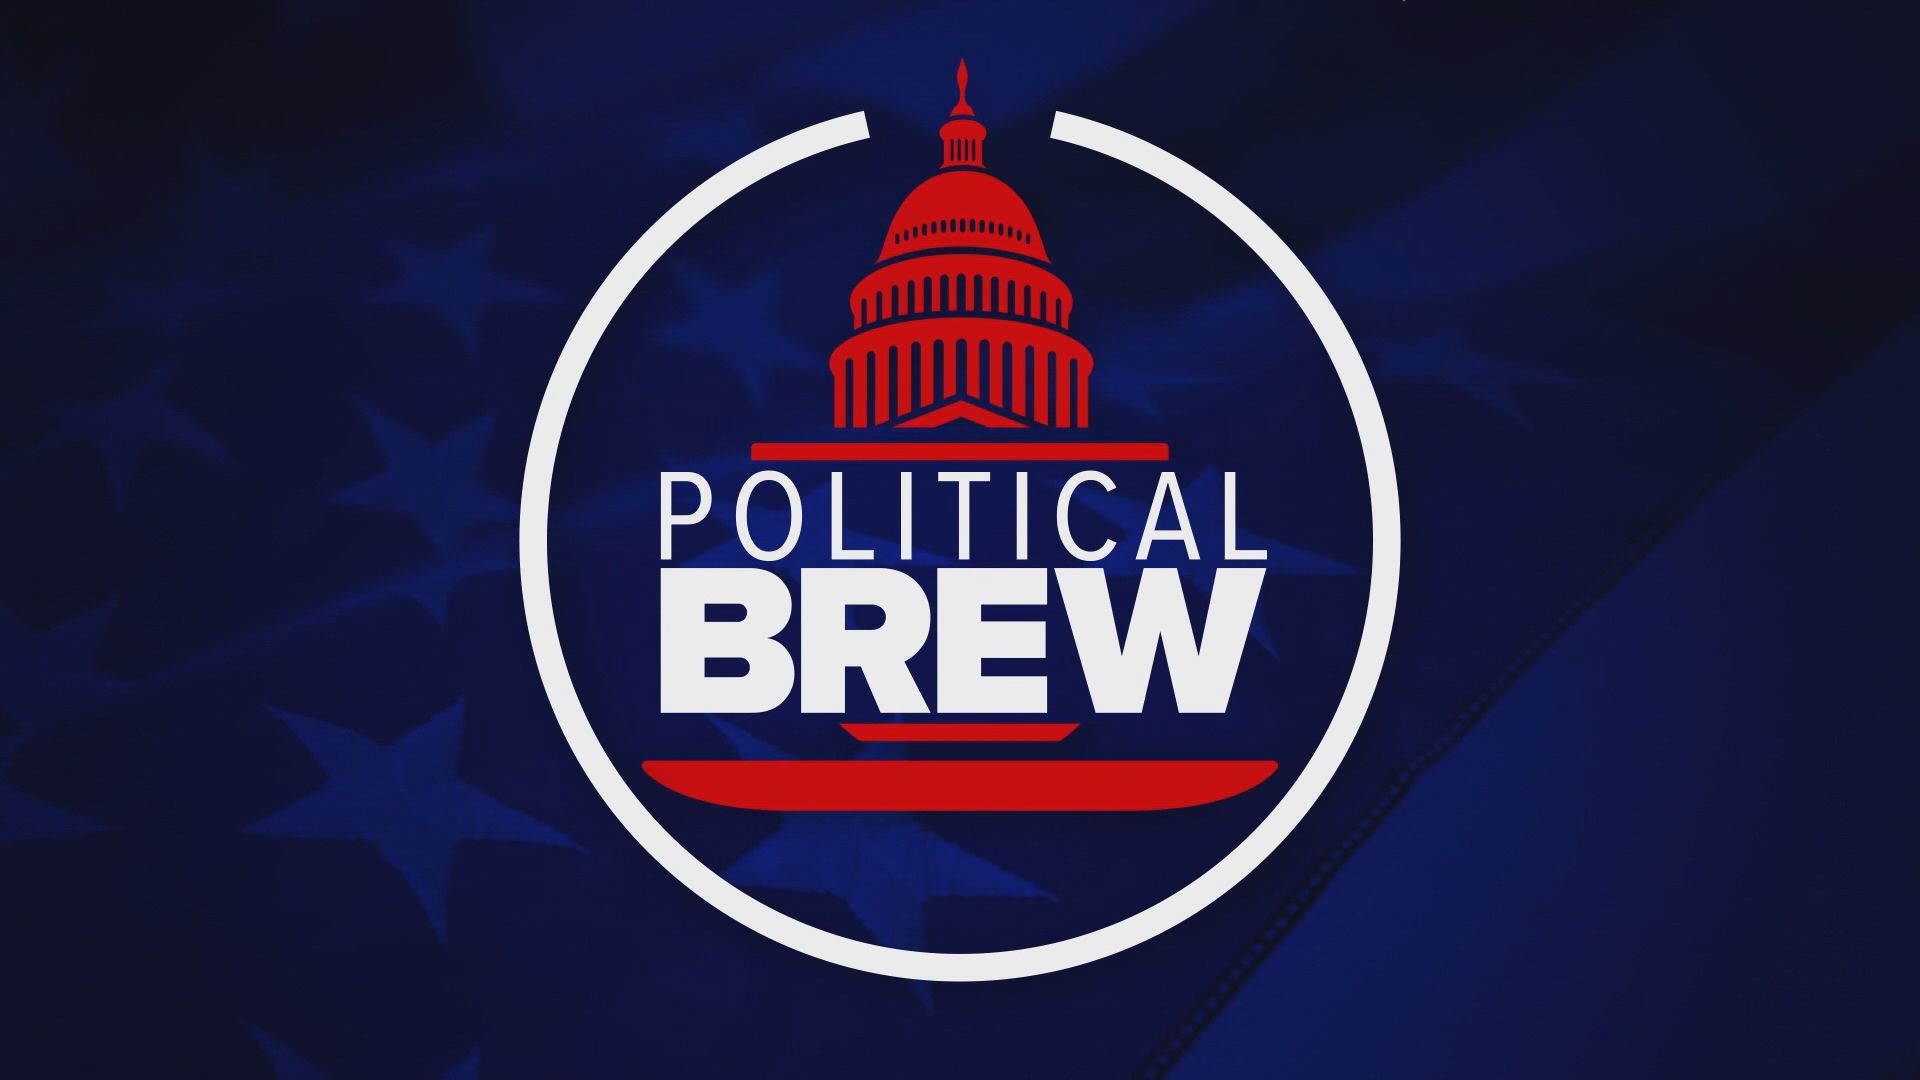 NEWS CENTER Maine political analysts, Republican Phil Harriman and Democrat Ethan Strimling, share their takes on the major political issues in Maine and the country